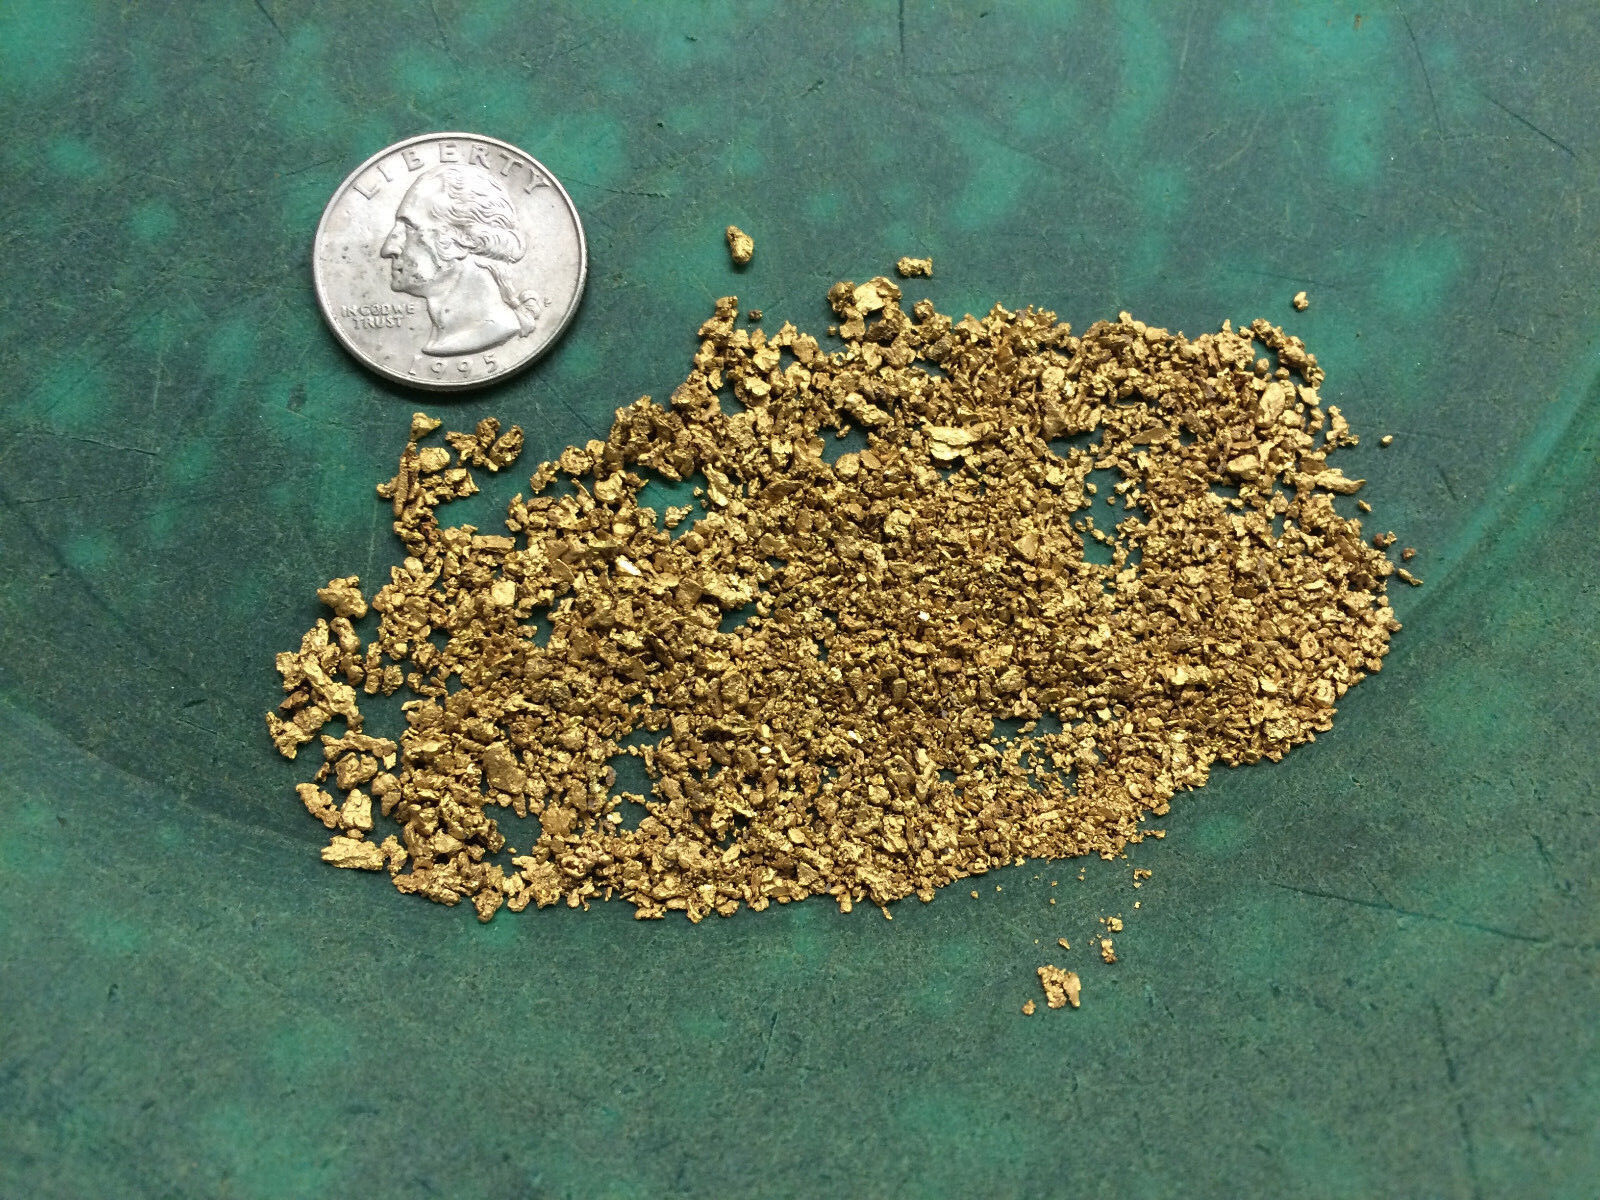 Rich GOLD PAYDIRT XL Nugget - Now offering PREMIUM PAYDIRT panning flakes